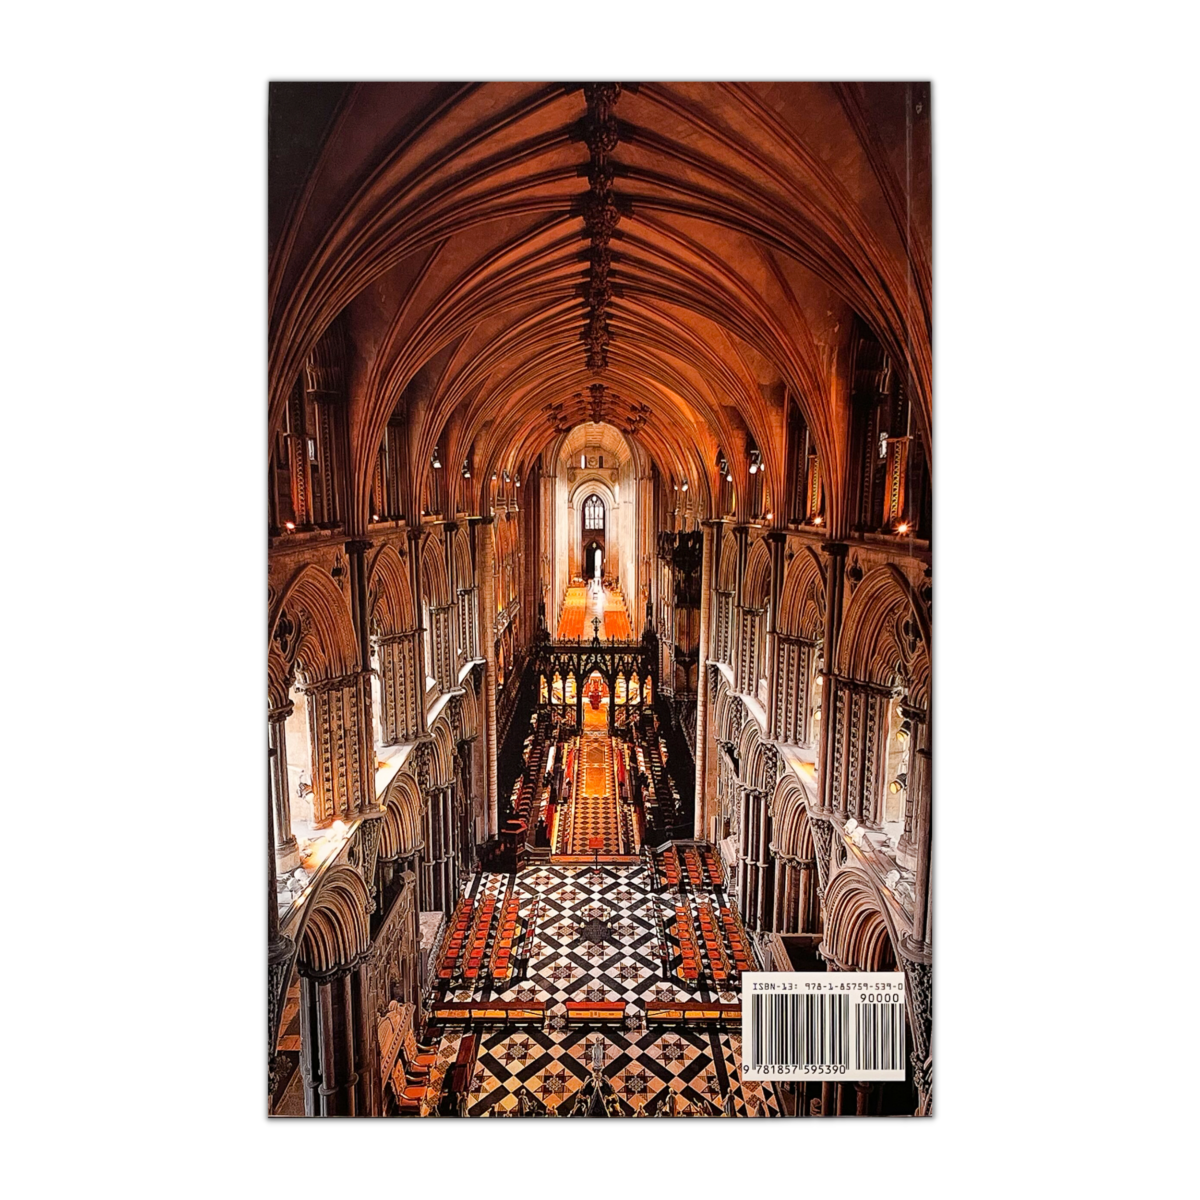 Image of Ely Cathedral Guidebook